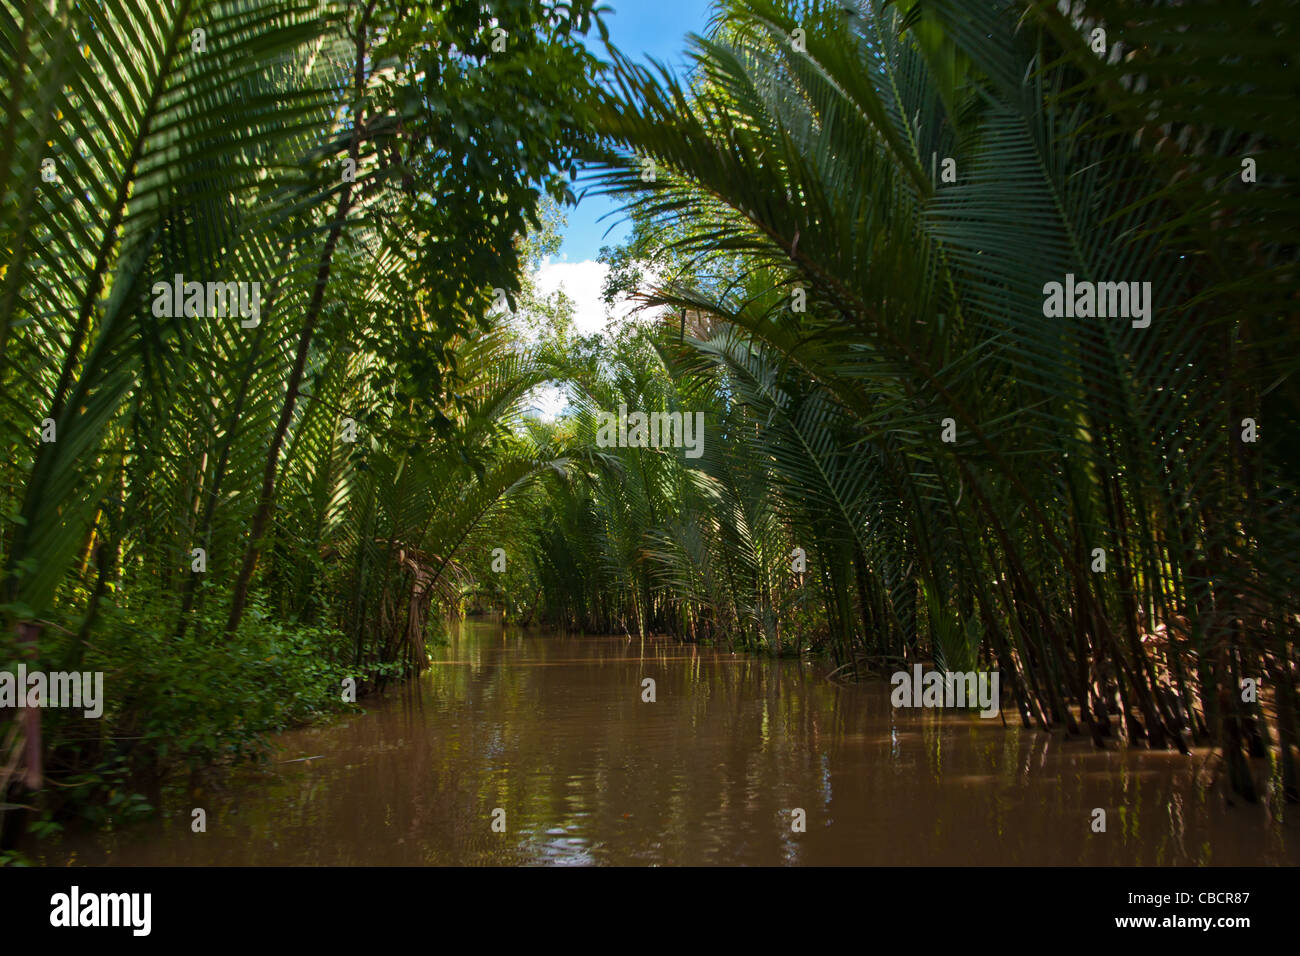 Palm trees forming a tunnel in Tan Thach near Ben Tre in Mekong Delta at the hearth of Southern Vietnam Stock Photo